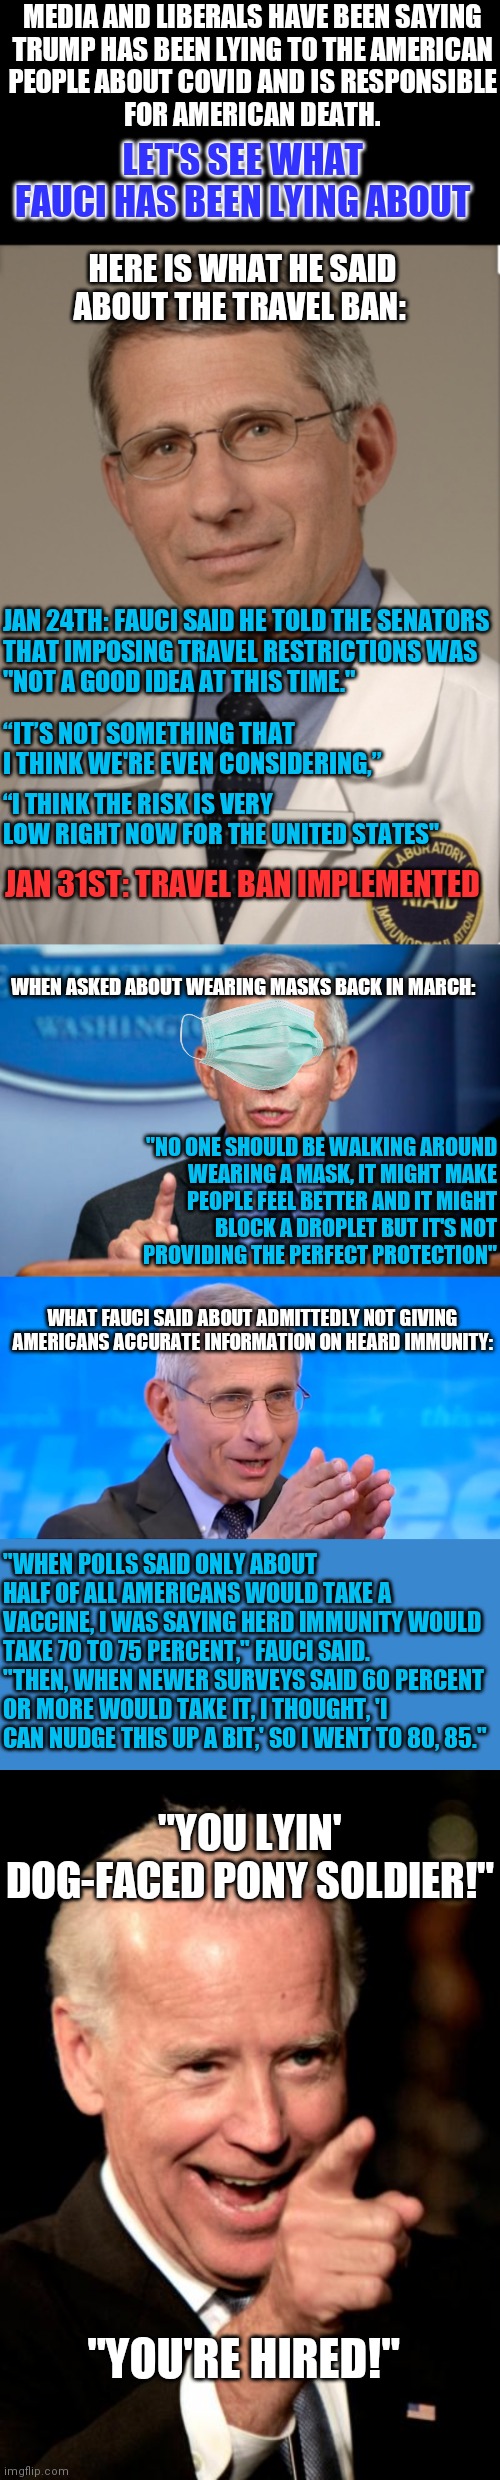 Looking out for their interest, not your interest | MEDIA AND LIBERALS HAVE BEEN SAYING
TRUMP HAS BEEN LYING TO THE AMERICAN
PEOPLE ABOUT COVID AND IS RESPONSIBLE
FOR AMERICAN DEATH. LET'S SEE WHAT FAUCI HAS BEEN LYING ABOUT; HERE IS WHAT HE SAID ABOUT THE TRAVEL BAN:; JAN 24TH: FAUCI SAID HE TOLD THE SENATORS
THAT IMPOSING TRAVEL RESTRICTIONS WAS
"NOT A GOOD IDEA AT THIS TIME."; “IT’S NOT SOMETHING THAT I THINK WE'RE EVEN CONSIDERING,”; “I THINK THE RISK IS VERY LOW RIGHT NOW FOR THE UNITED STATES"; JAN 31ST: TRAVEL BAN IMPLEMENTED; WHEN ASKED ABOUT WEARING MASKS BACK IN MARCH:; "NO ONE SHOULD BE WALKING AROUND
WEARING A MASK, IT MIGHT MAKE
PEOPLE FEEL BETTER AND IT MIGHT
BLOCK A DROPLET BUT IT'S NOT
PROVIDING THE PERFECT PROTECTION"; WHAT FAUCI SAID ABOUT ADMITTEDLY NOT GIVING AMERICANS ACCURATE INFORMATION ON HEARD IMMUNITY:; "WHEN POLLS SAID ONLY ABOUT HALF OF ALL AMERICANS WOULD TAKE A VACCINE, I WAS SAYING HERD IMMUNITY WOULD TAKE 70 TO 75 PERCENT," FAUCI SAID. "THEN, WHEN NEWER SURVEYS SAID 60 PERCENT OR MORE WOULD TAKE IT, I THOUGHT, 'I CAN NUDGE THIS UP A BIT,' SO I WENT TO 80, 85."; "YOU LYIN' DOG-FACED PONY SOLDIER!"; "YOU'RE HIRED!" | image tagged in dr fauci,dr fauci 2020,memes,smilin biden,covid19 | made w/ Imgflip meme maker